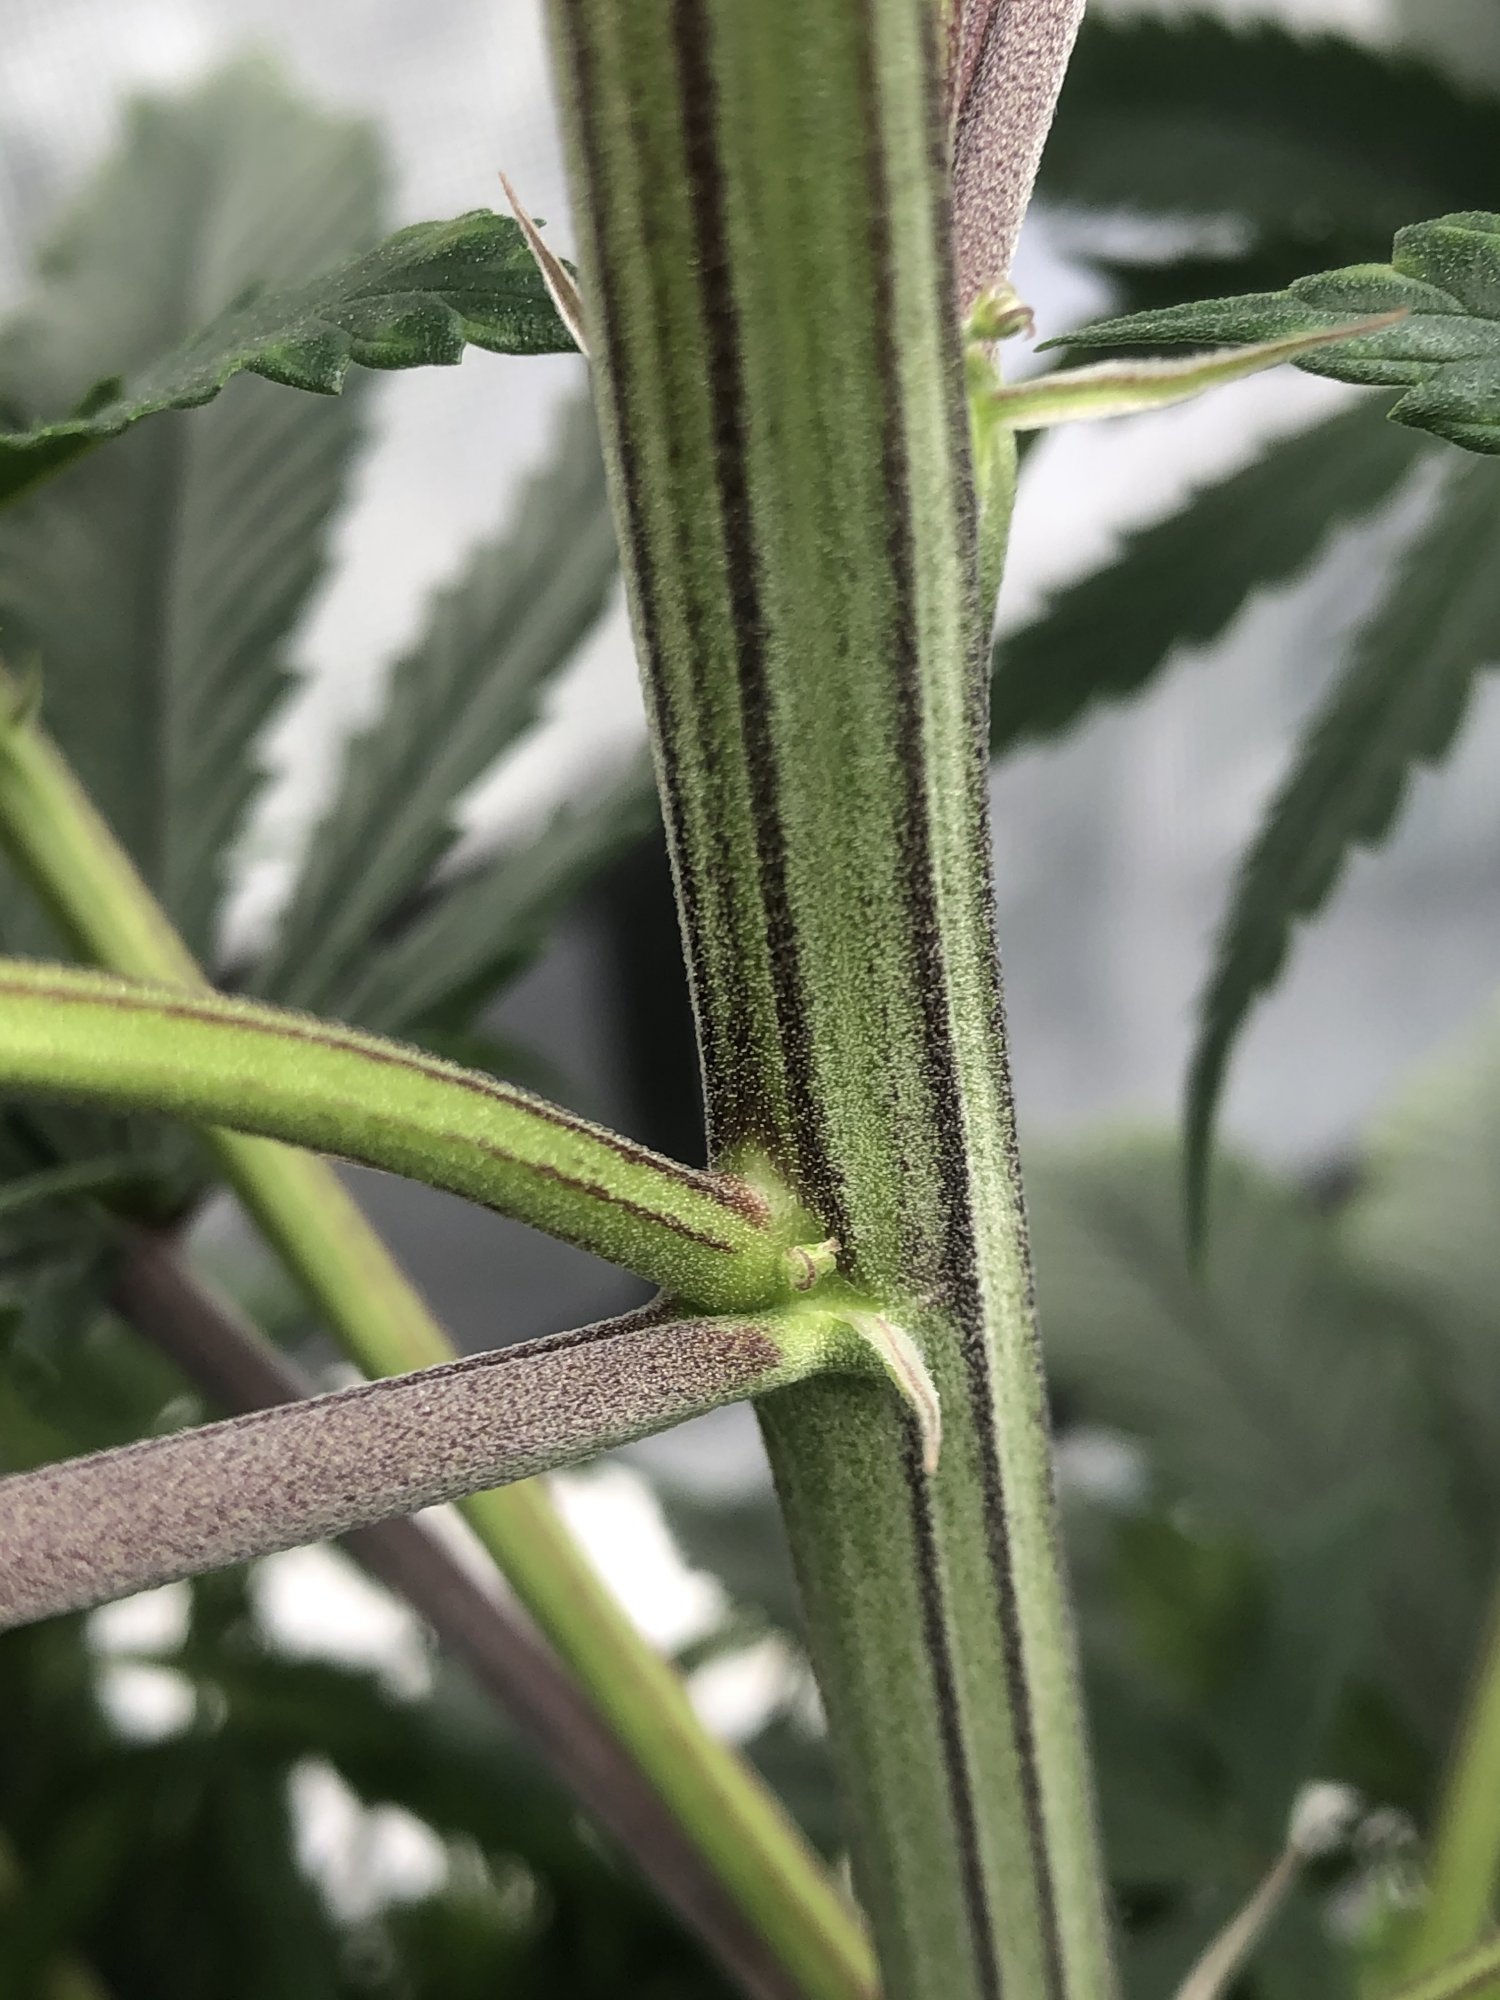 First time grower in need of help identifying genders 2